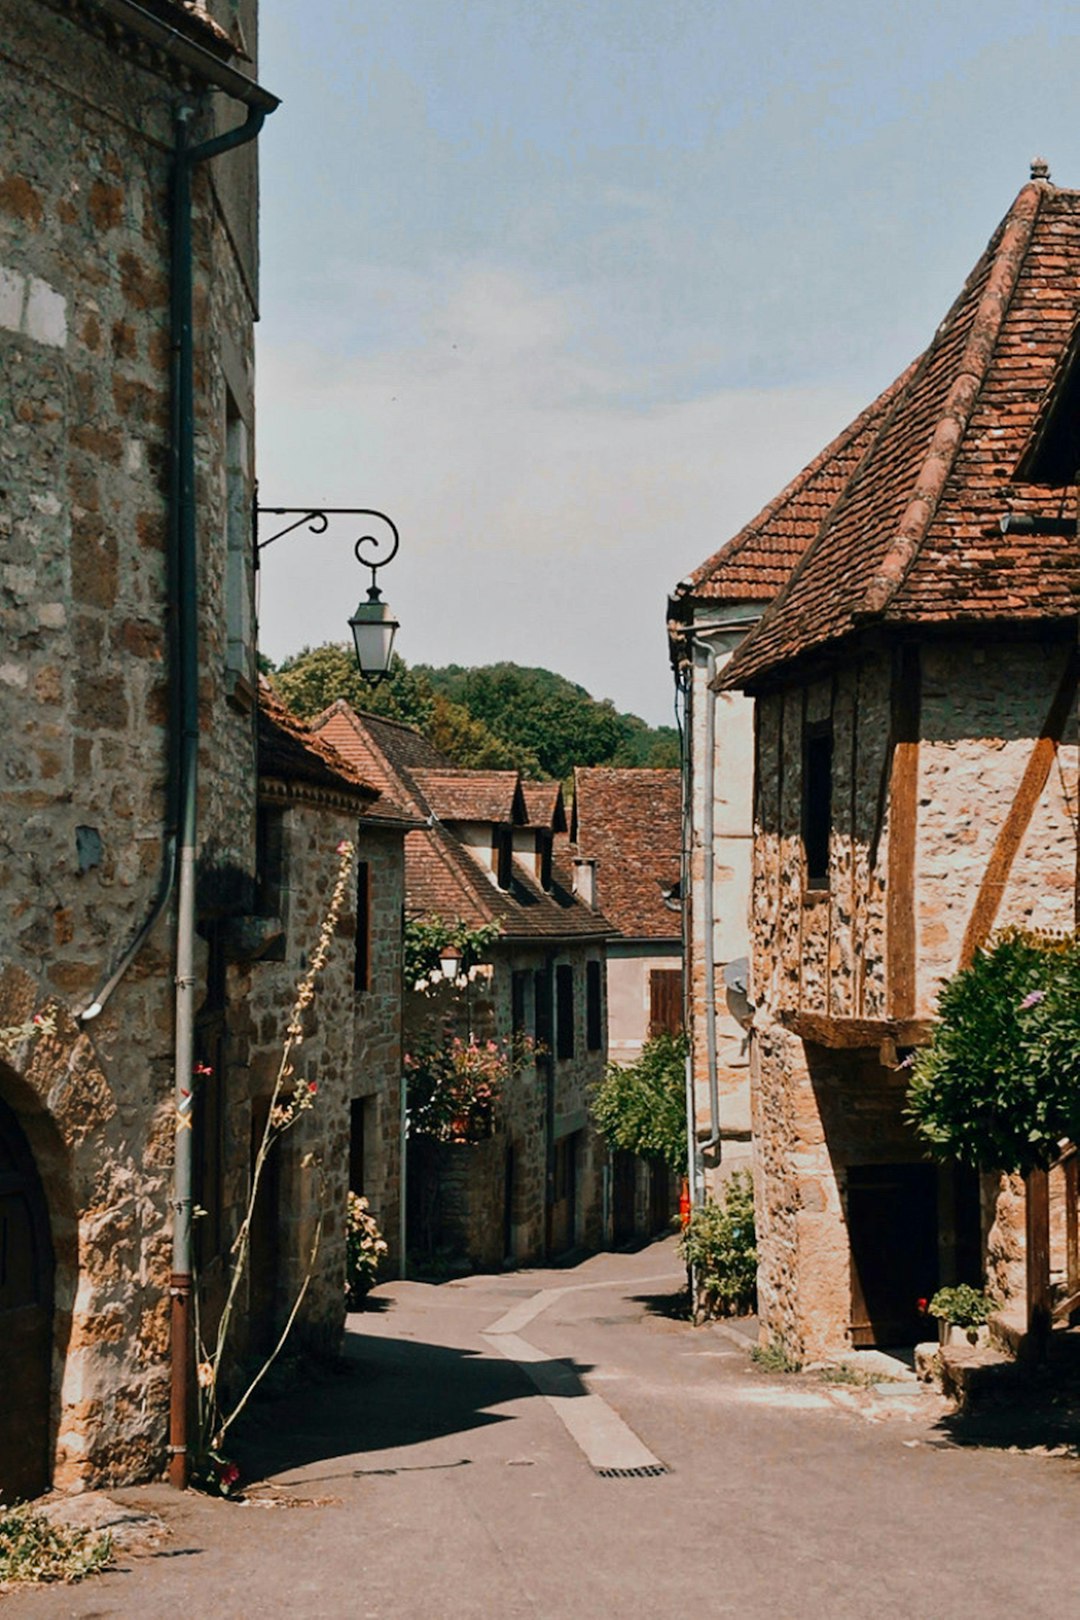 Travel Tips and Stories of Carennac in France